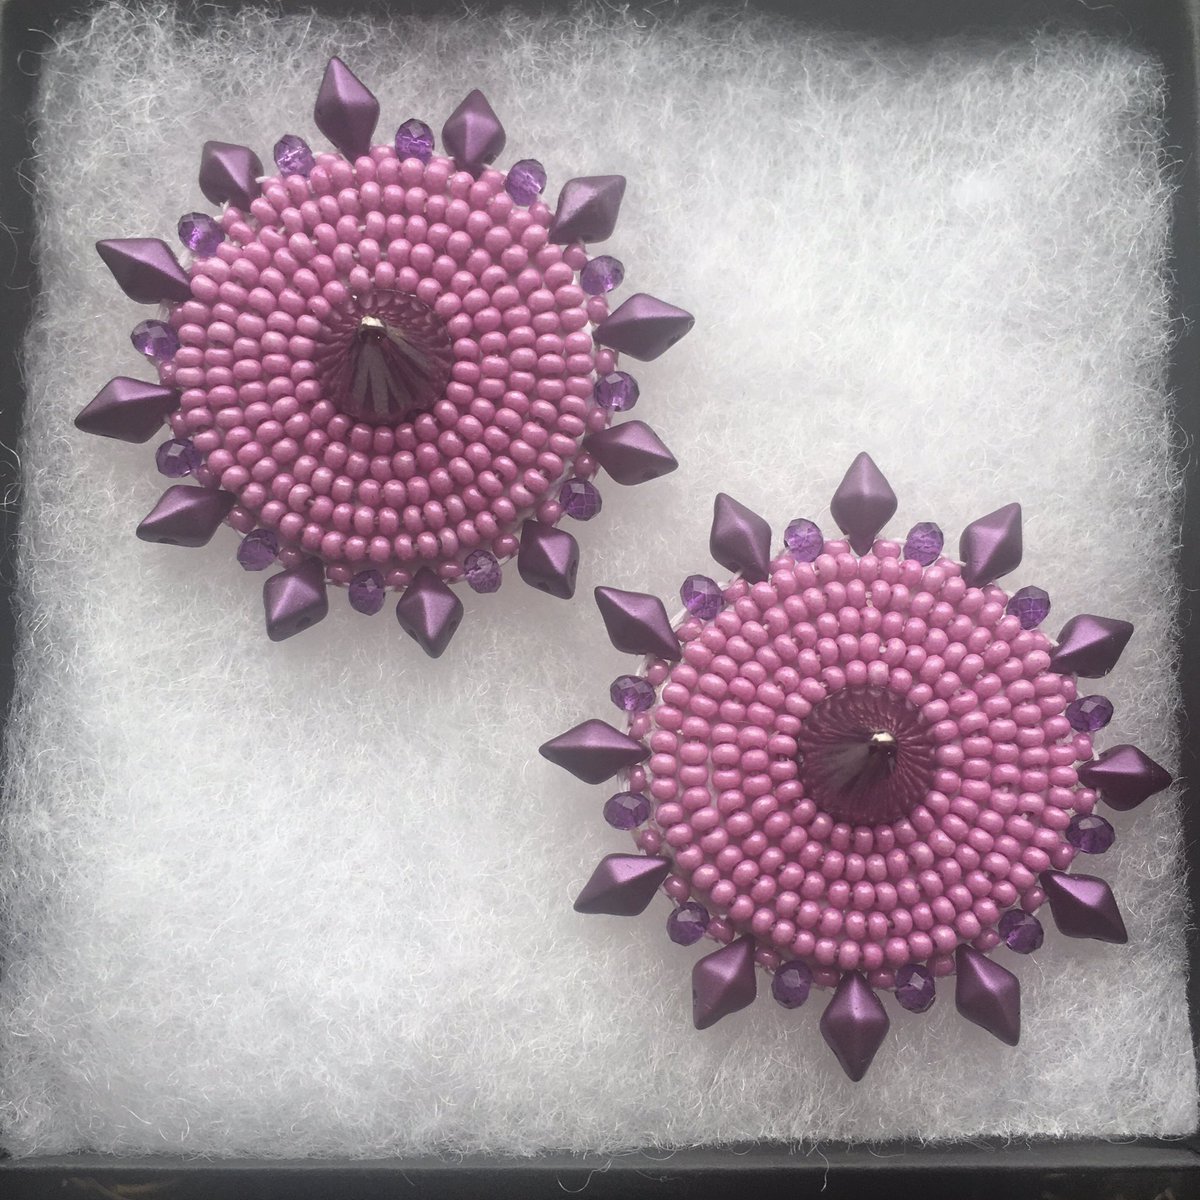 spiked earrings! (on posts) i love them so much, i’ll definitely make more if y’all like them! all available now! dm to claim